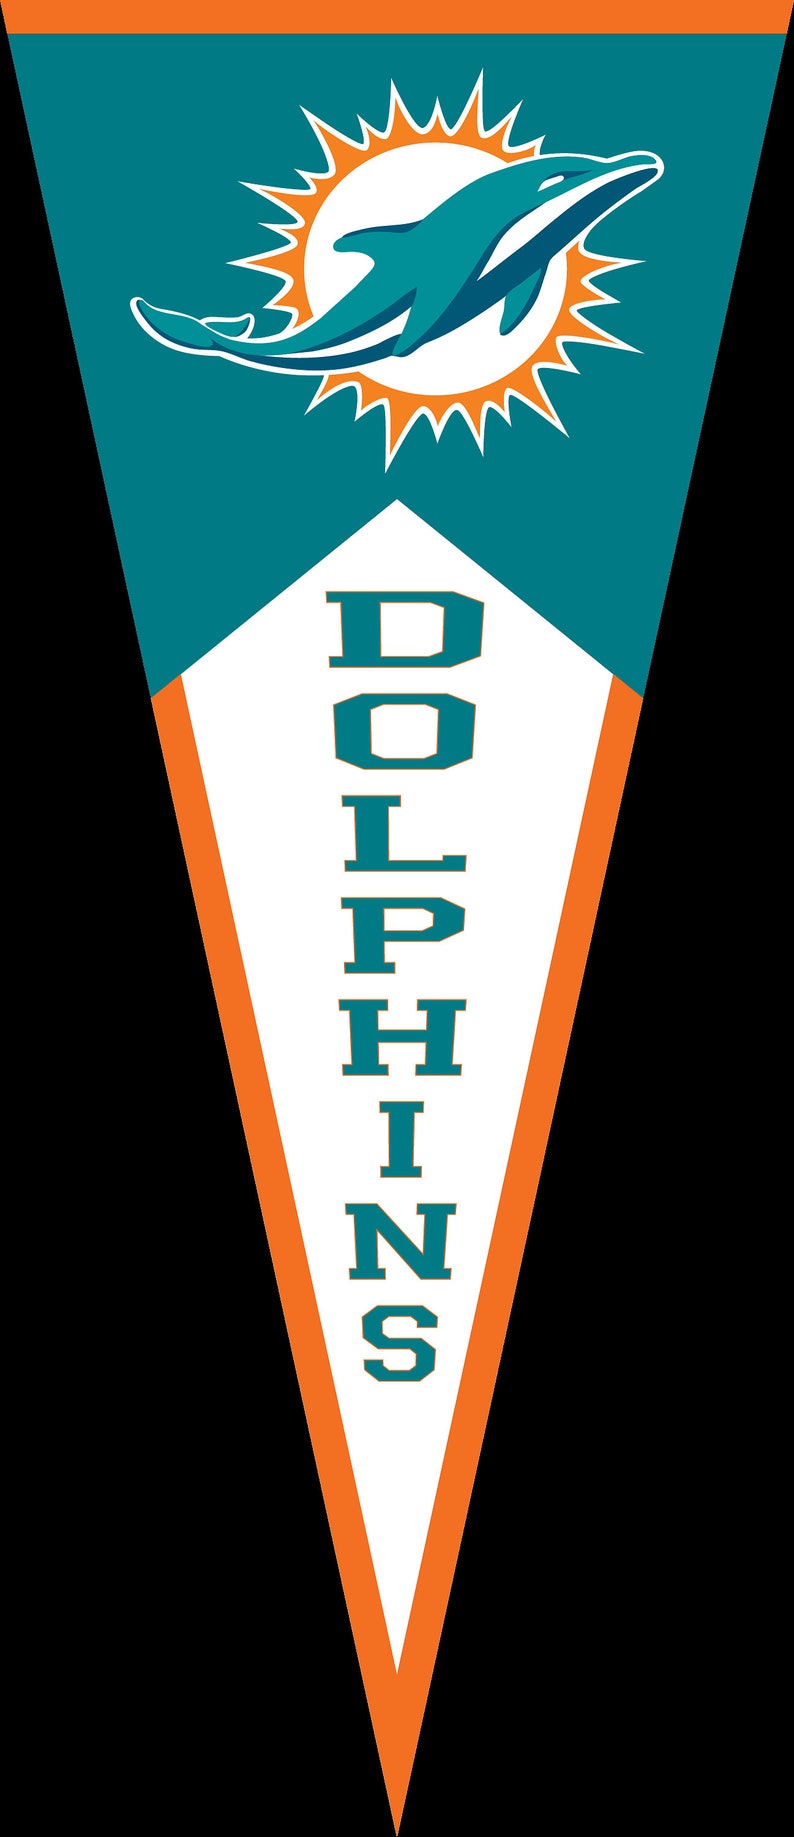 Download Miami Dolphins svg mega pack Miami dolphins svg for cricut ...